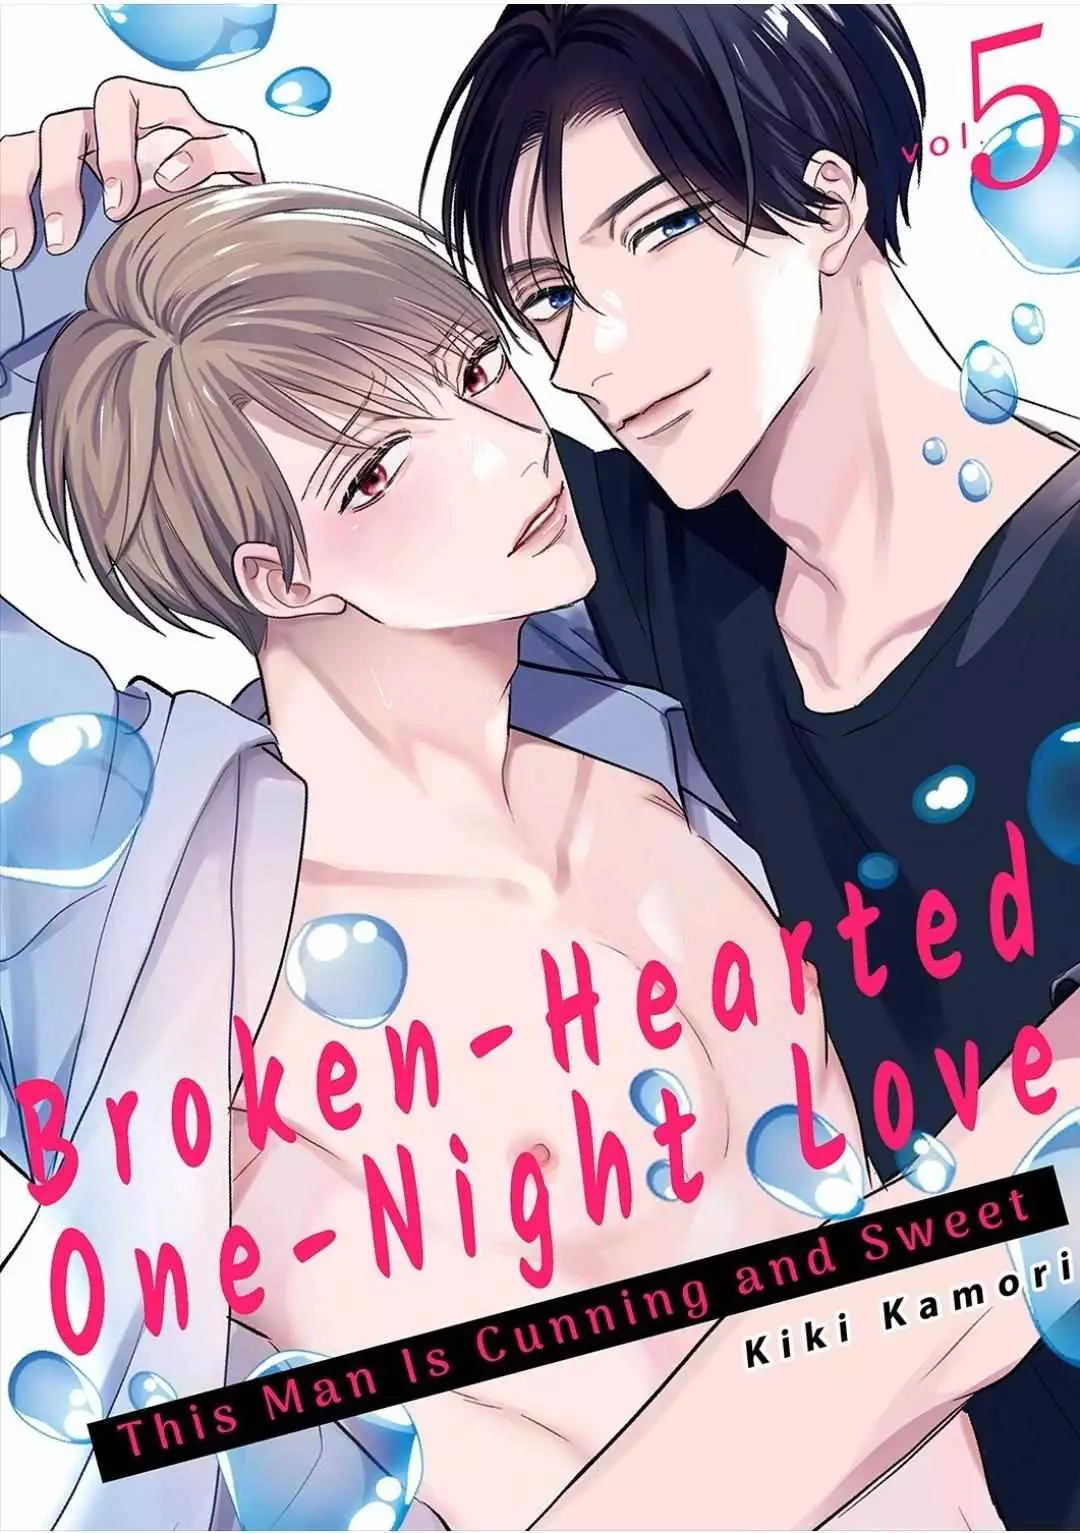 Broken-Hearted One-Night Love ~This Man Is Cunning And Sweet~ - 5 page 2-5a4b3a56